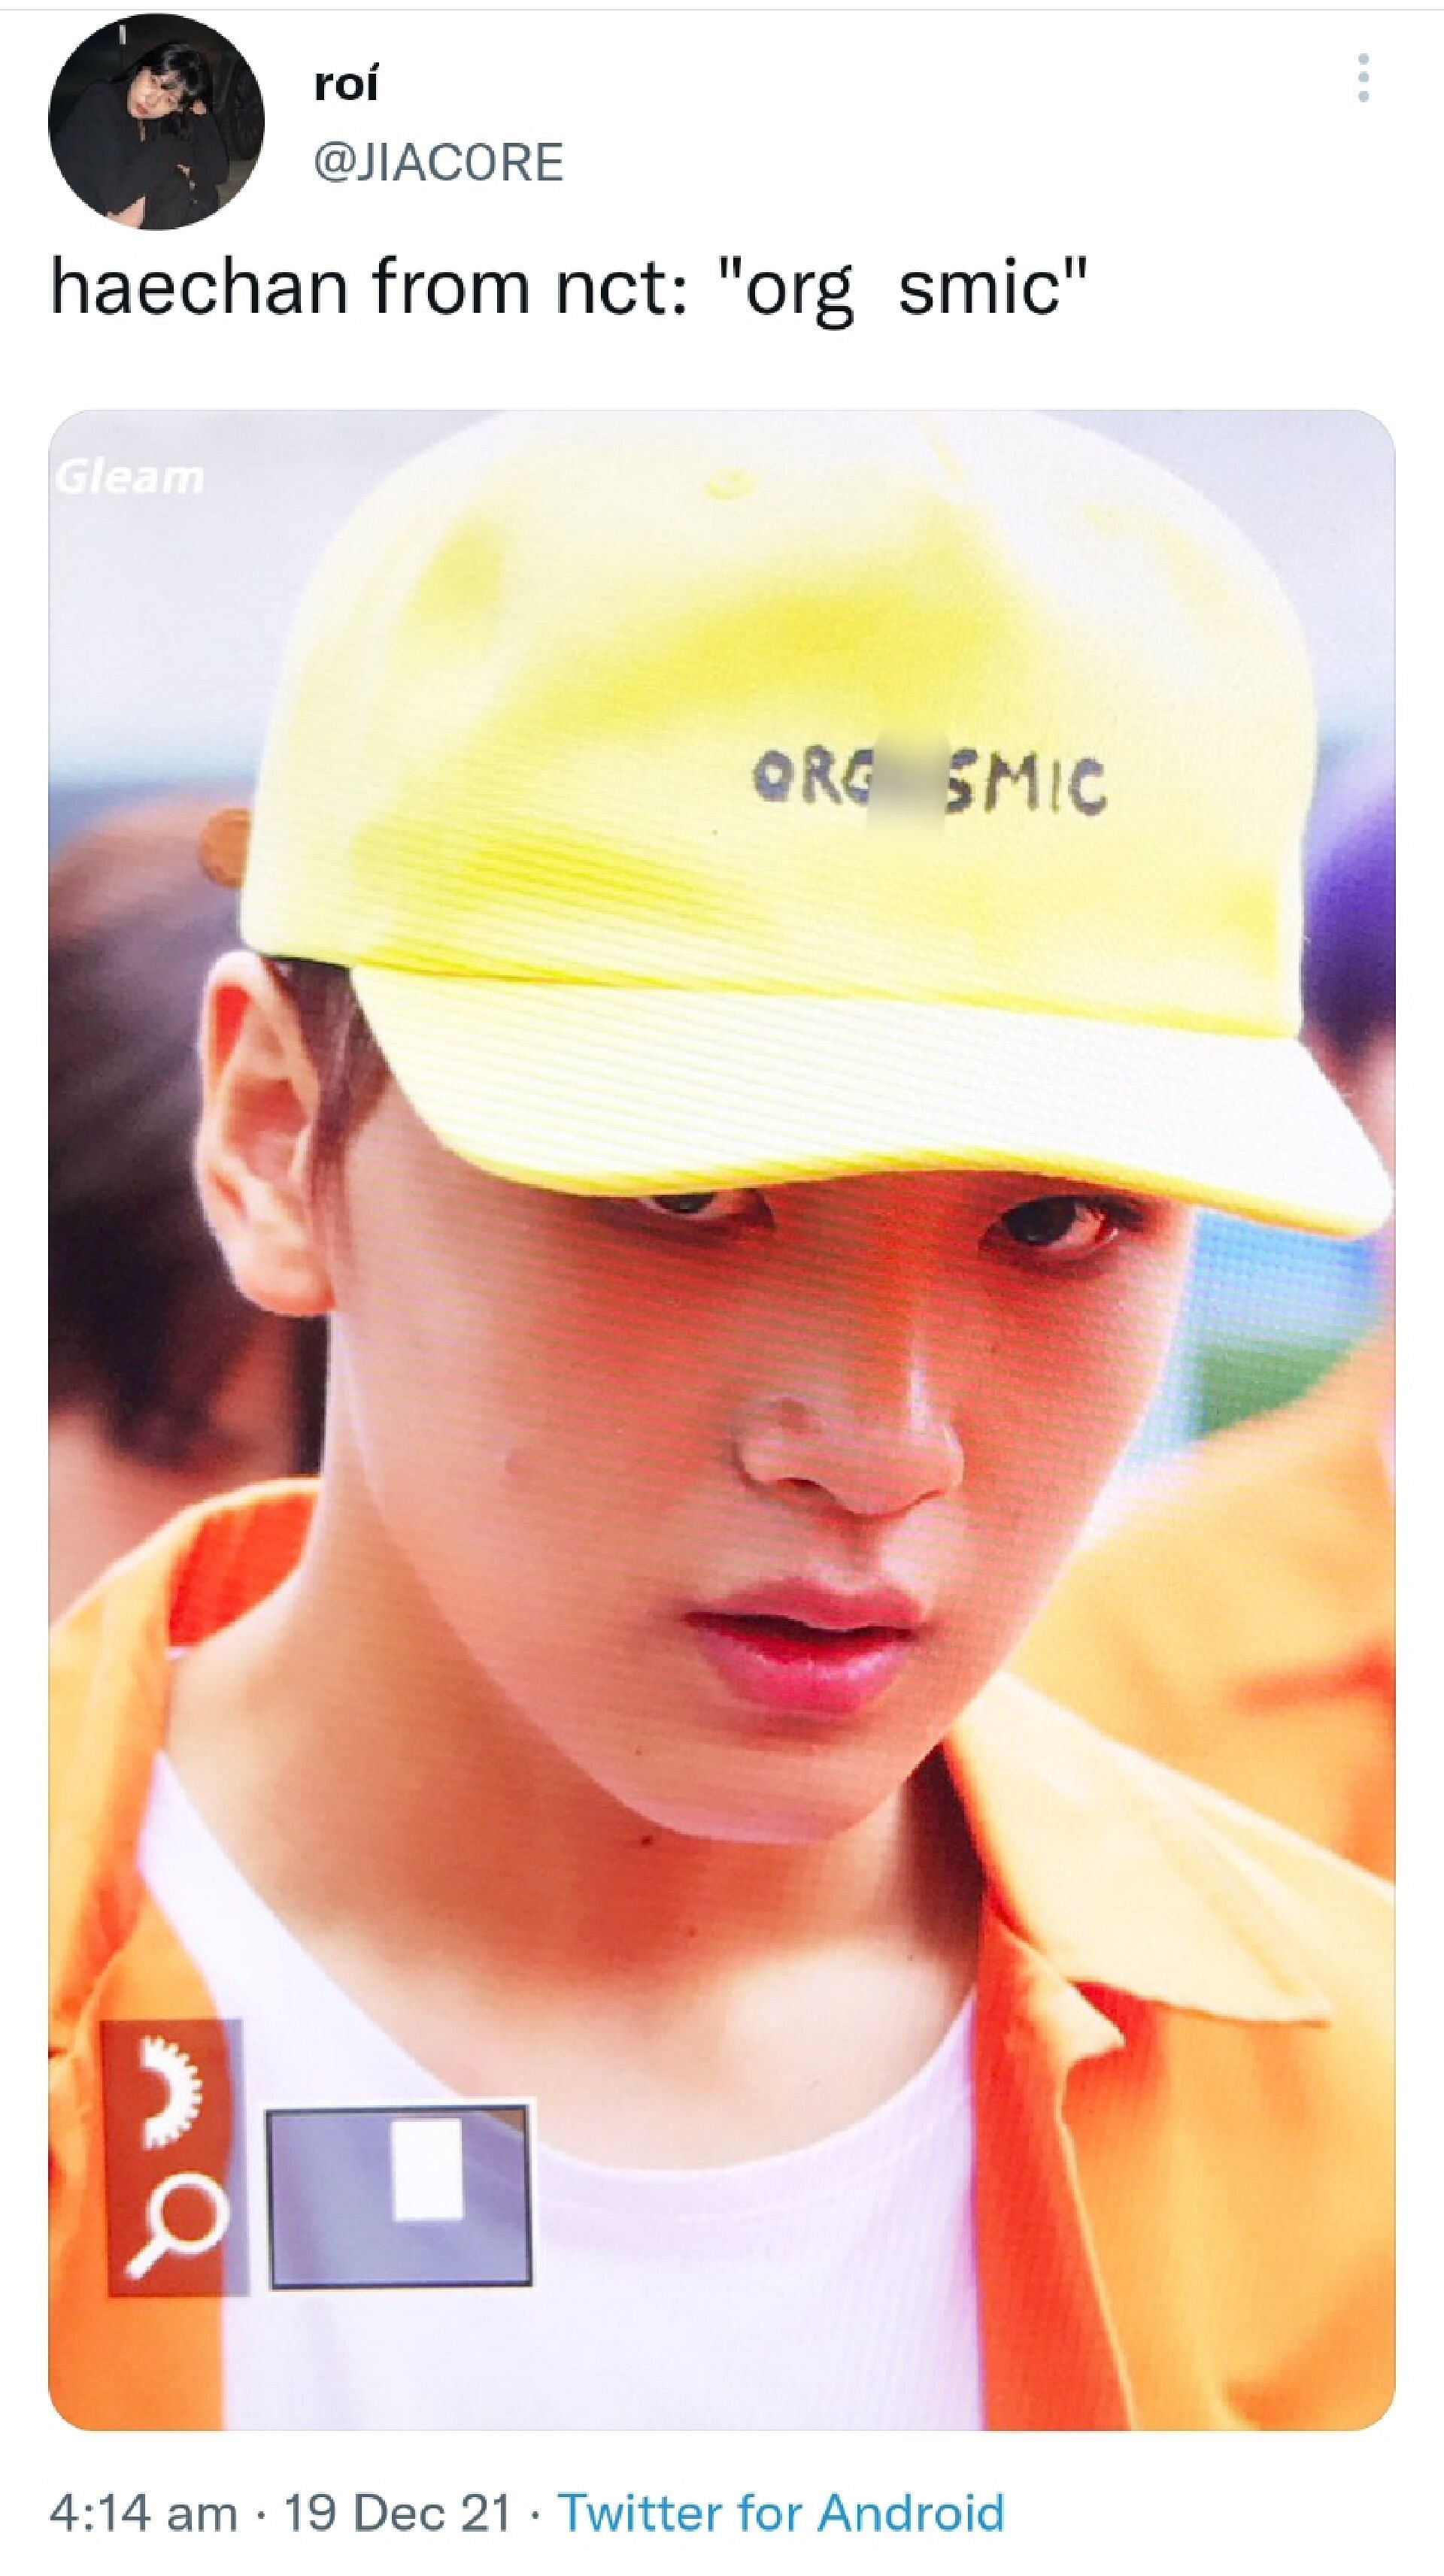 Haechan from NCT wearing a cap that says &quot;org*smic&quot;